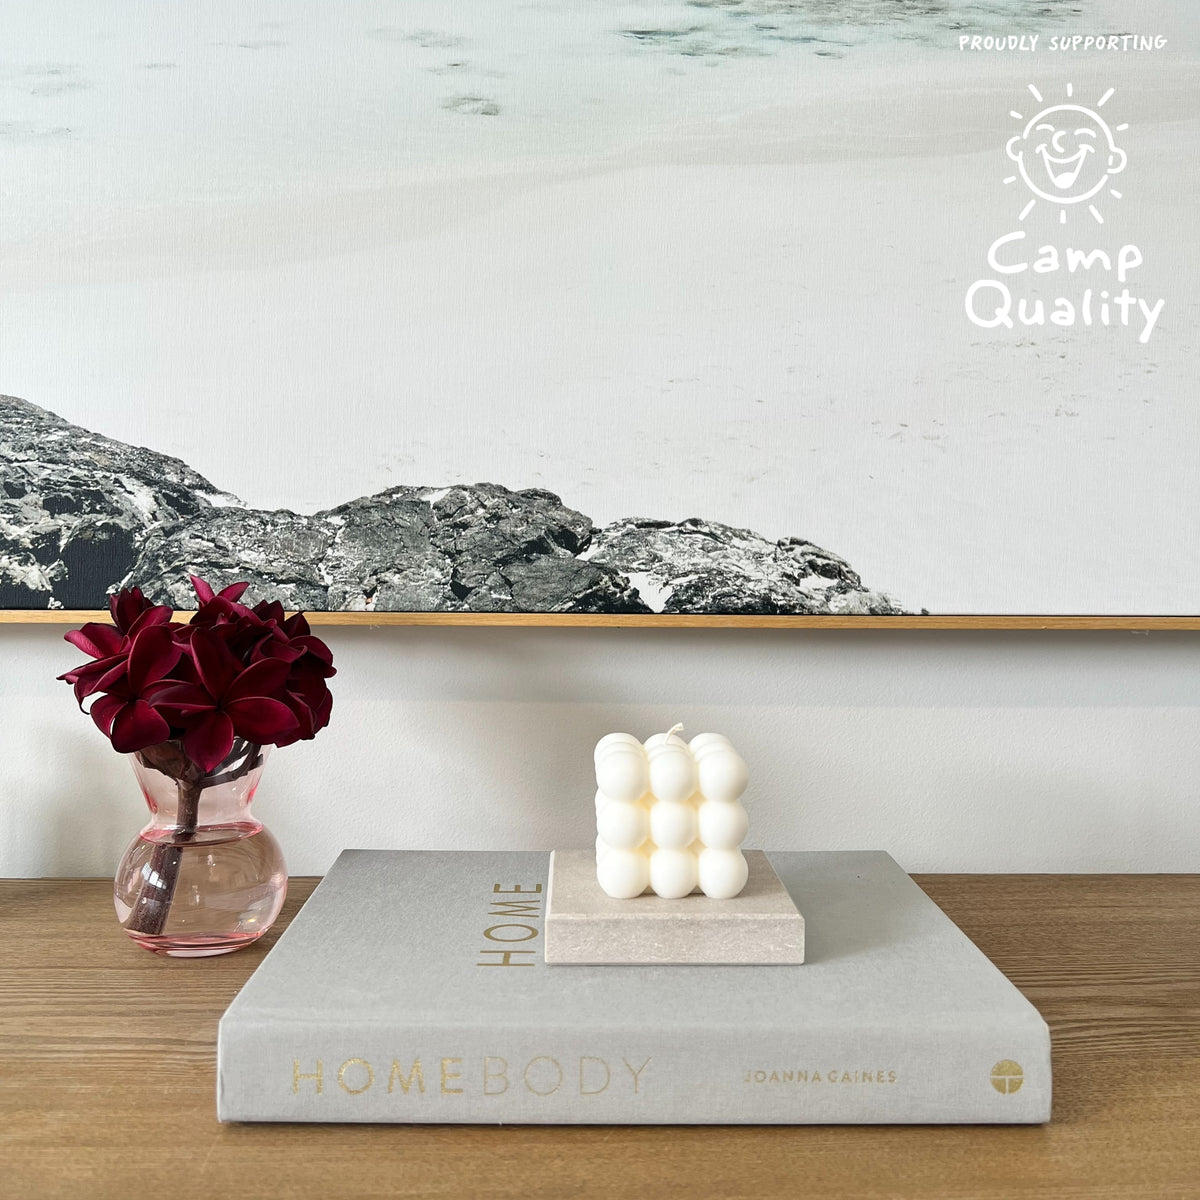 Square Stone Candle Holder in Caesarstone Topus Concrete created by Aureliia Collection. Styled with Studio McKenna No. 27 candle, upon Joanna Gaines book  next to vase with fresh flowers on timber table. This candle holder has full of movement, opacity, and depth of delicate mineral formations over a warm greige base, flushed with rugged patinas and pastel-pink undertones. The perfect home decor item.